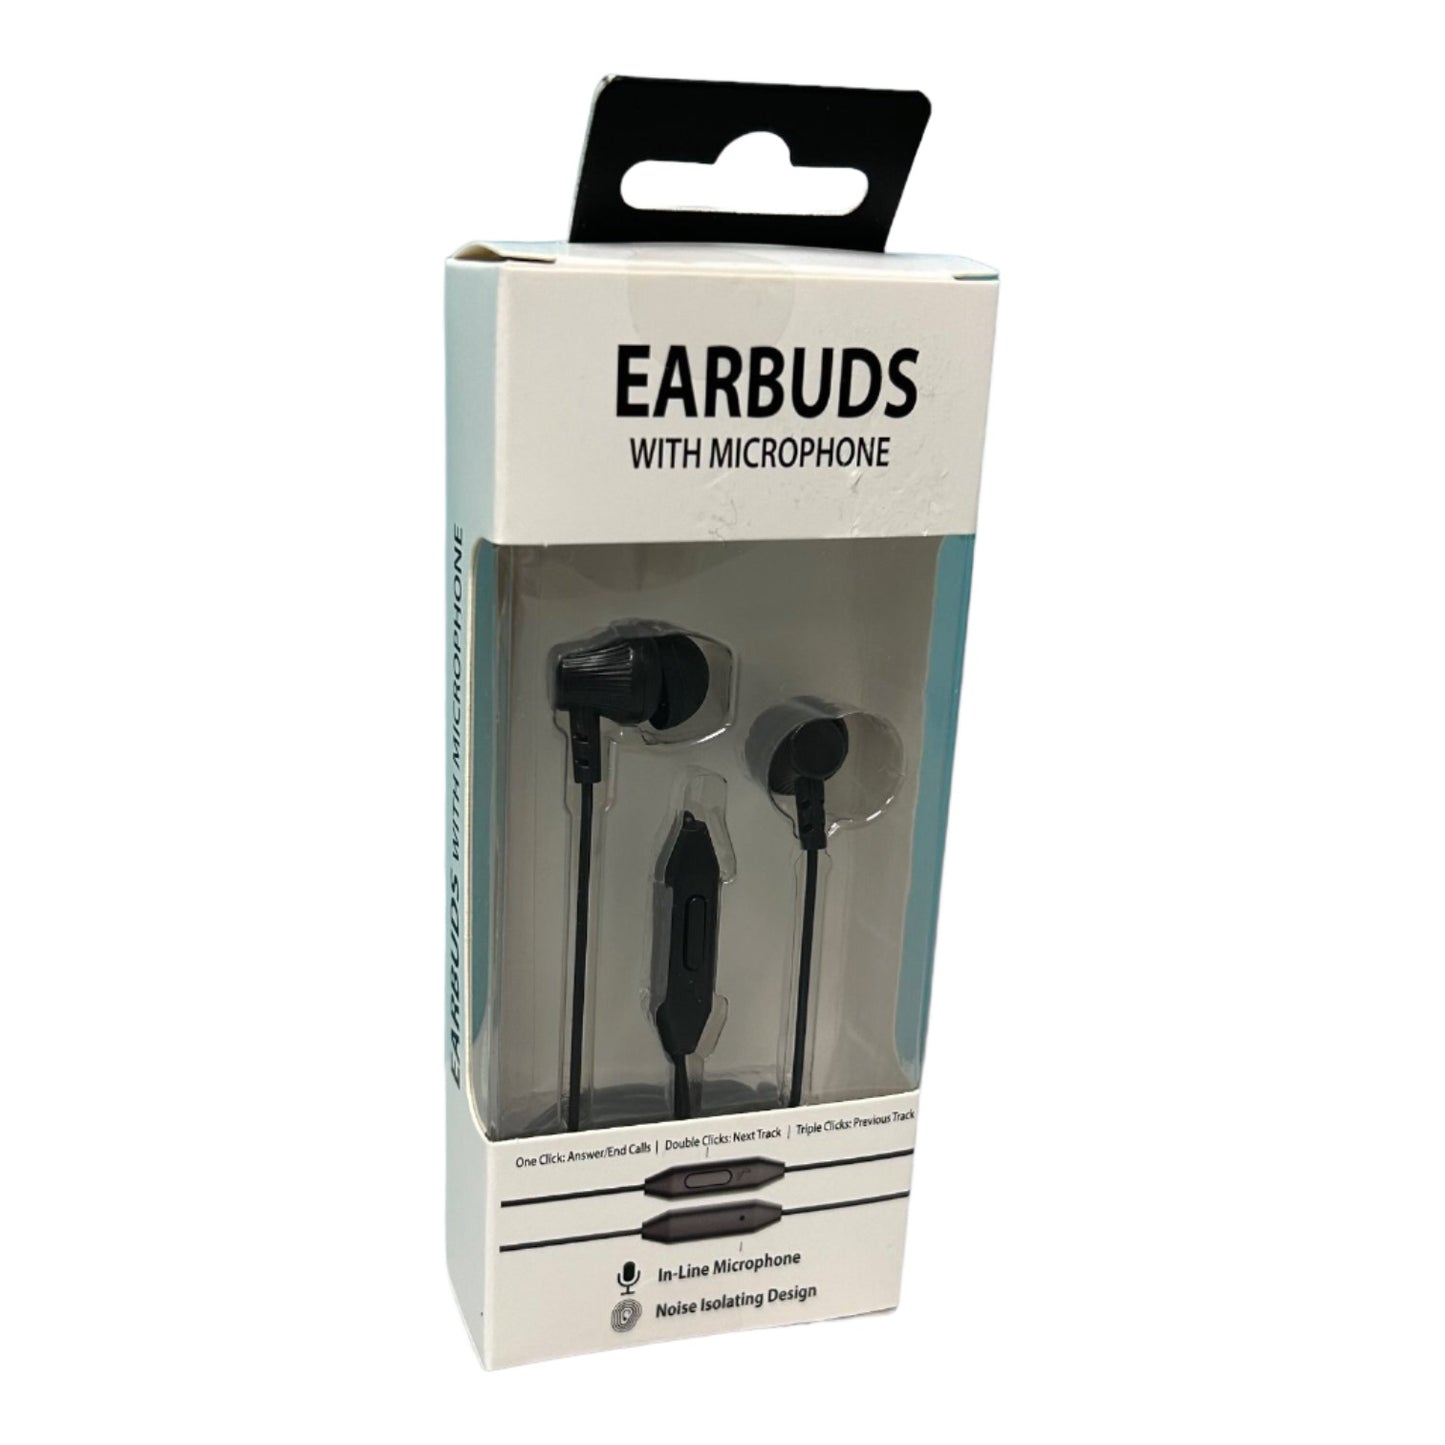 NEW! Earbuds with Microphone